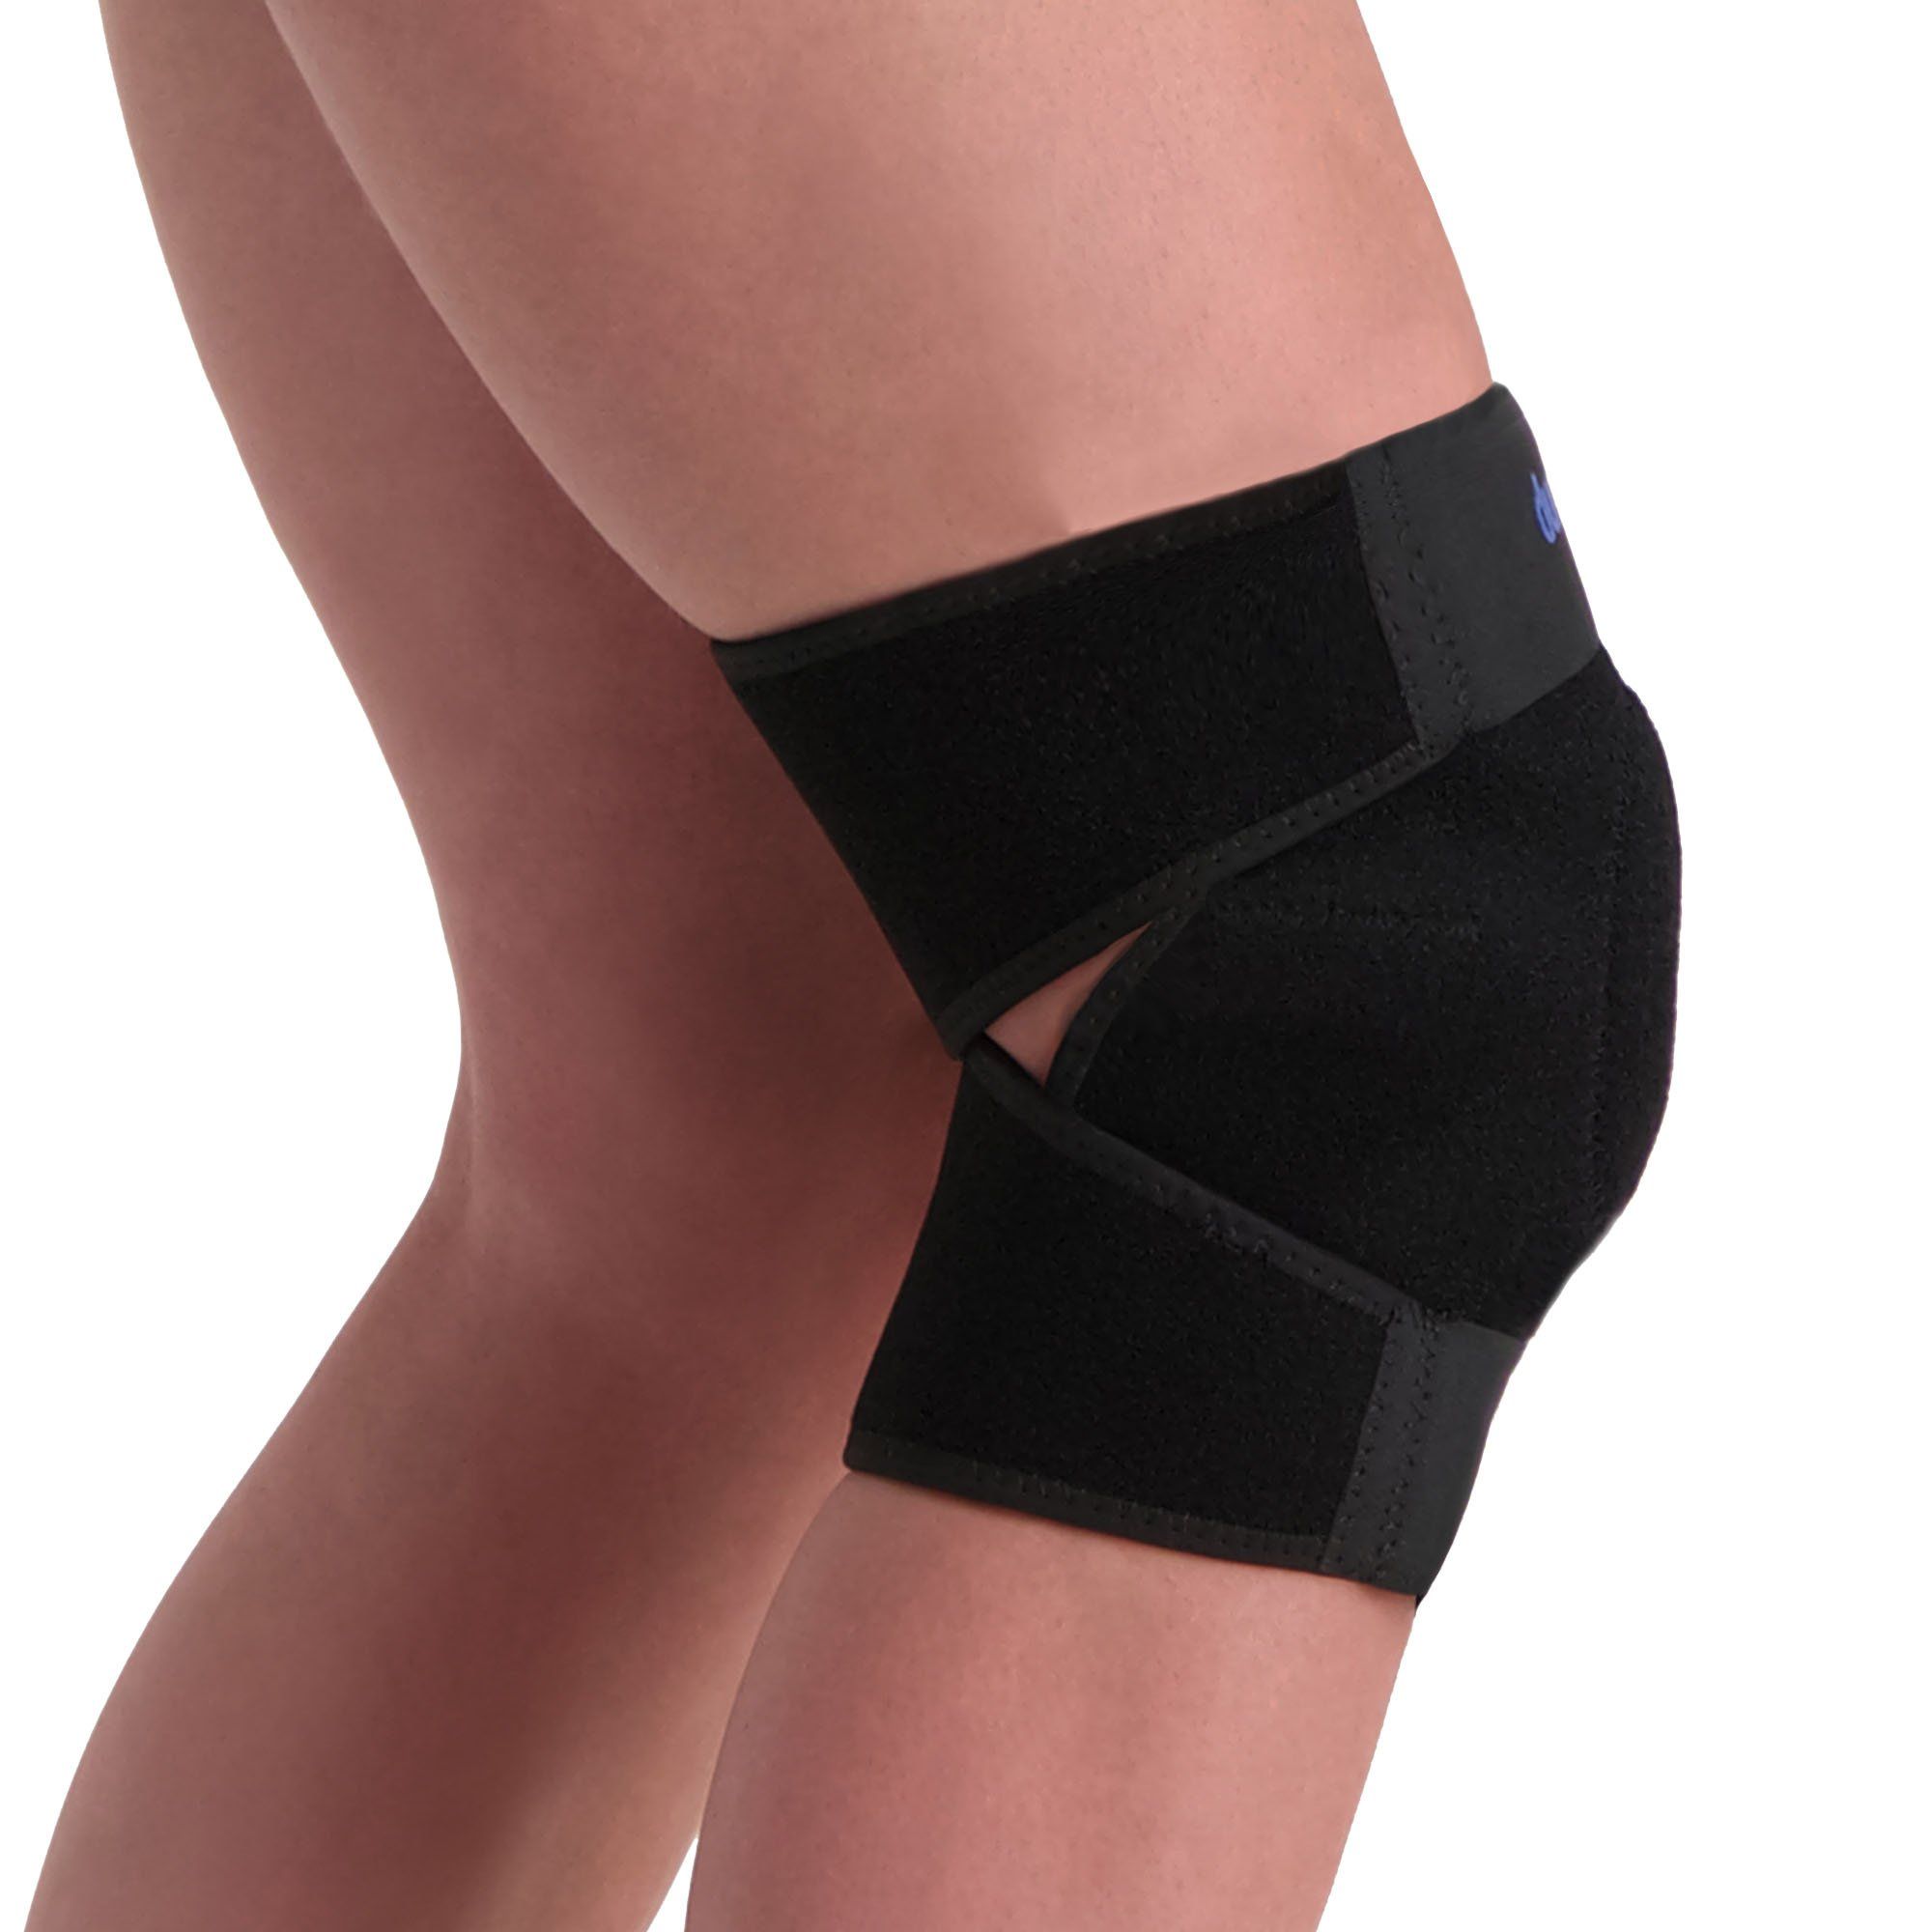 dunimed knee support wrap product information